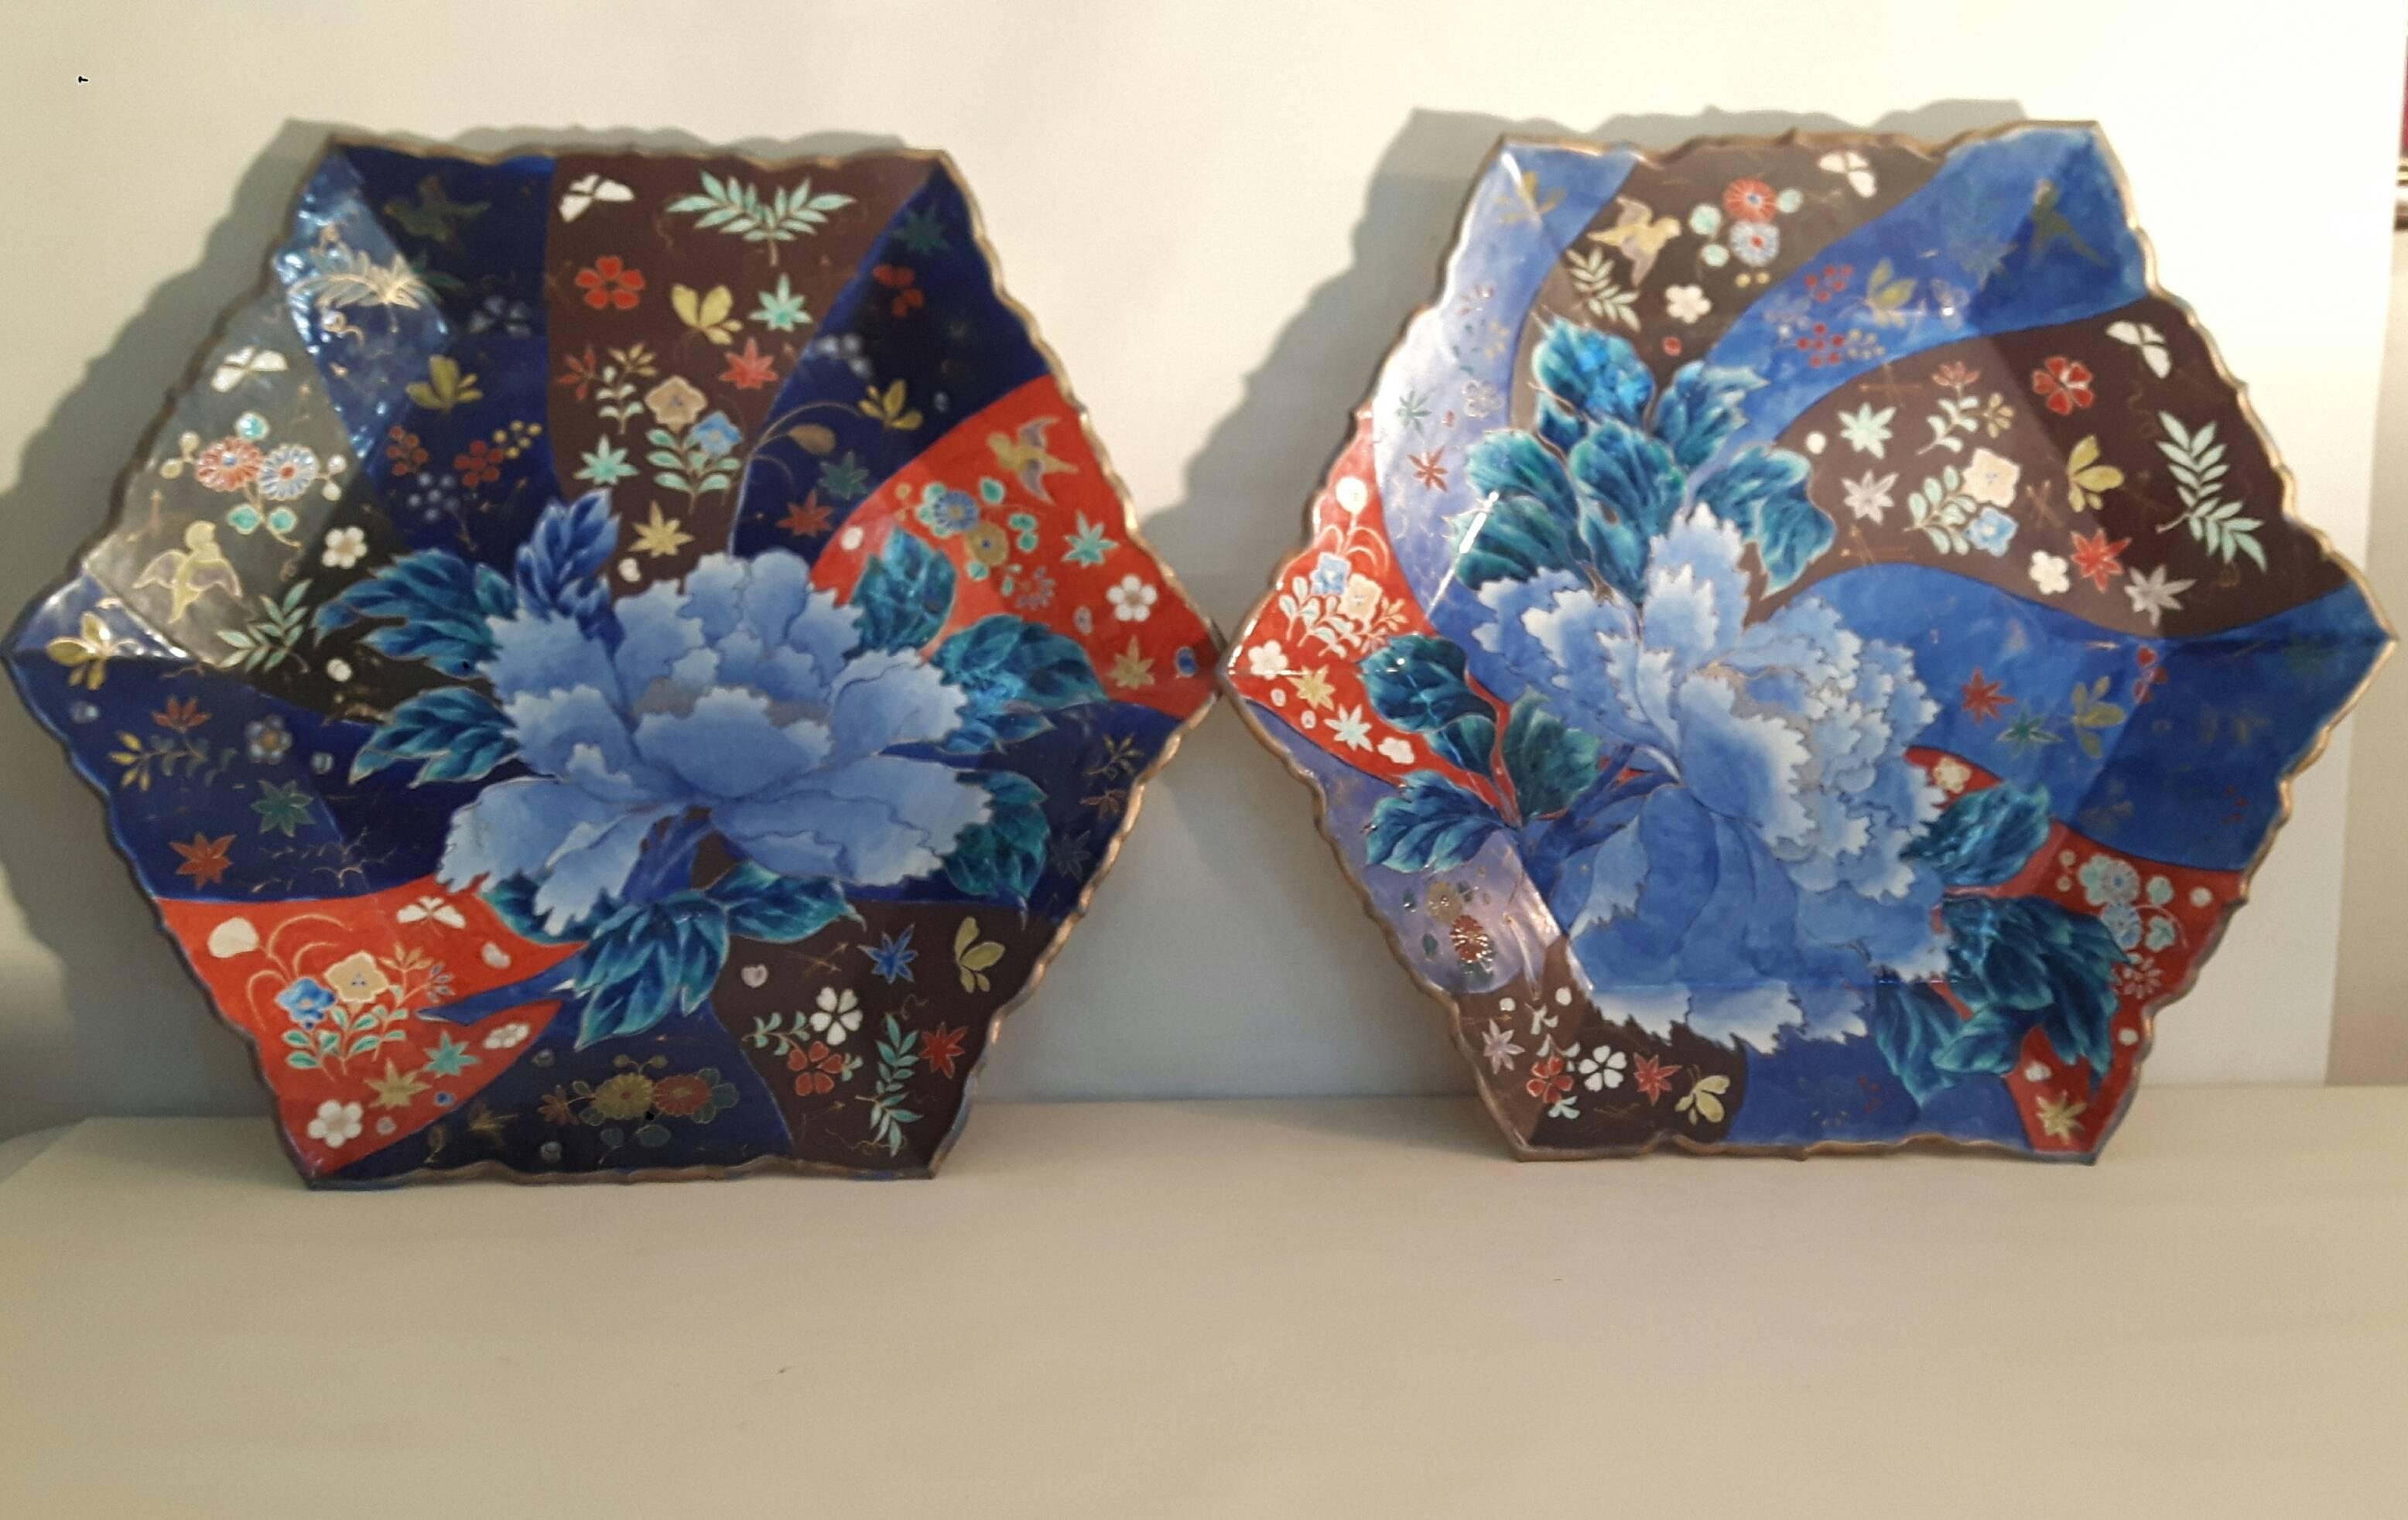 A wonderfully designed and decorated pair of Japanese Imari dishes, hexagonal shaped, signed by artists Crouncha. Decorated with a blue peony (a symbol of immortality) and various flowers in a swirl of richly colored bands.